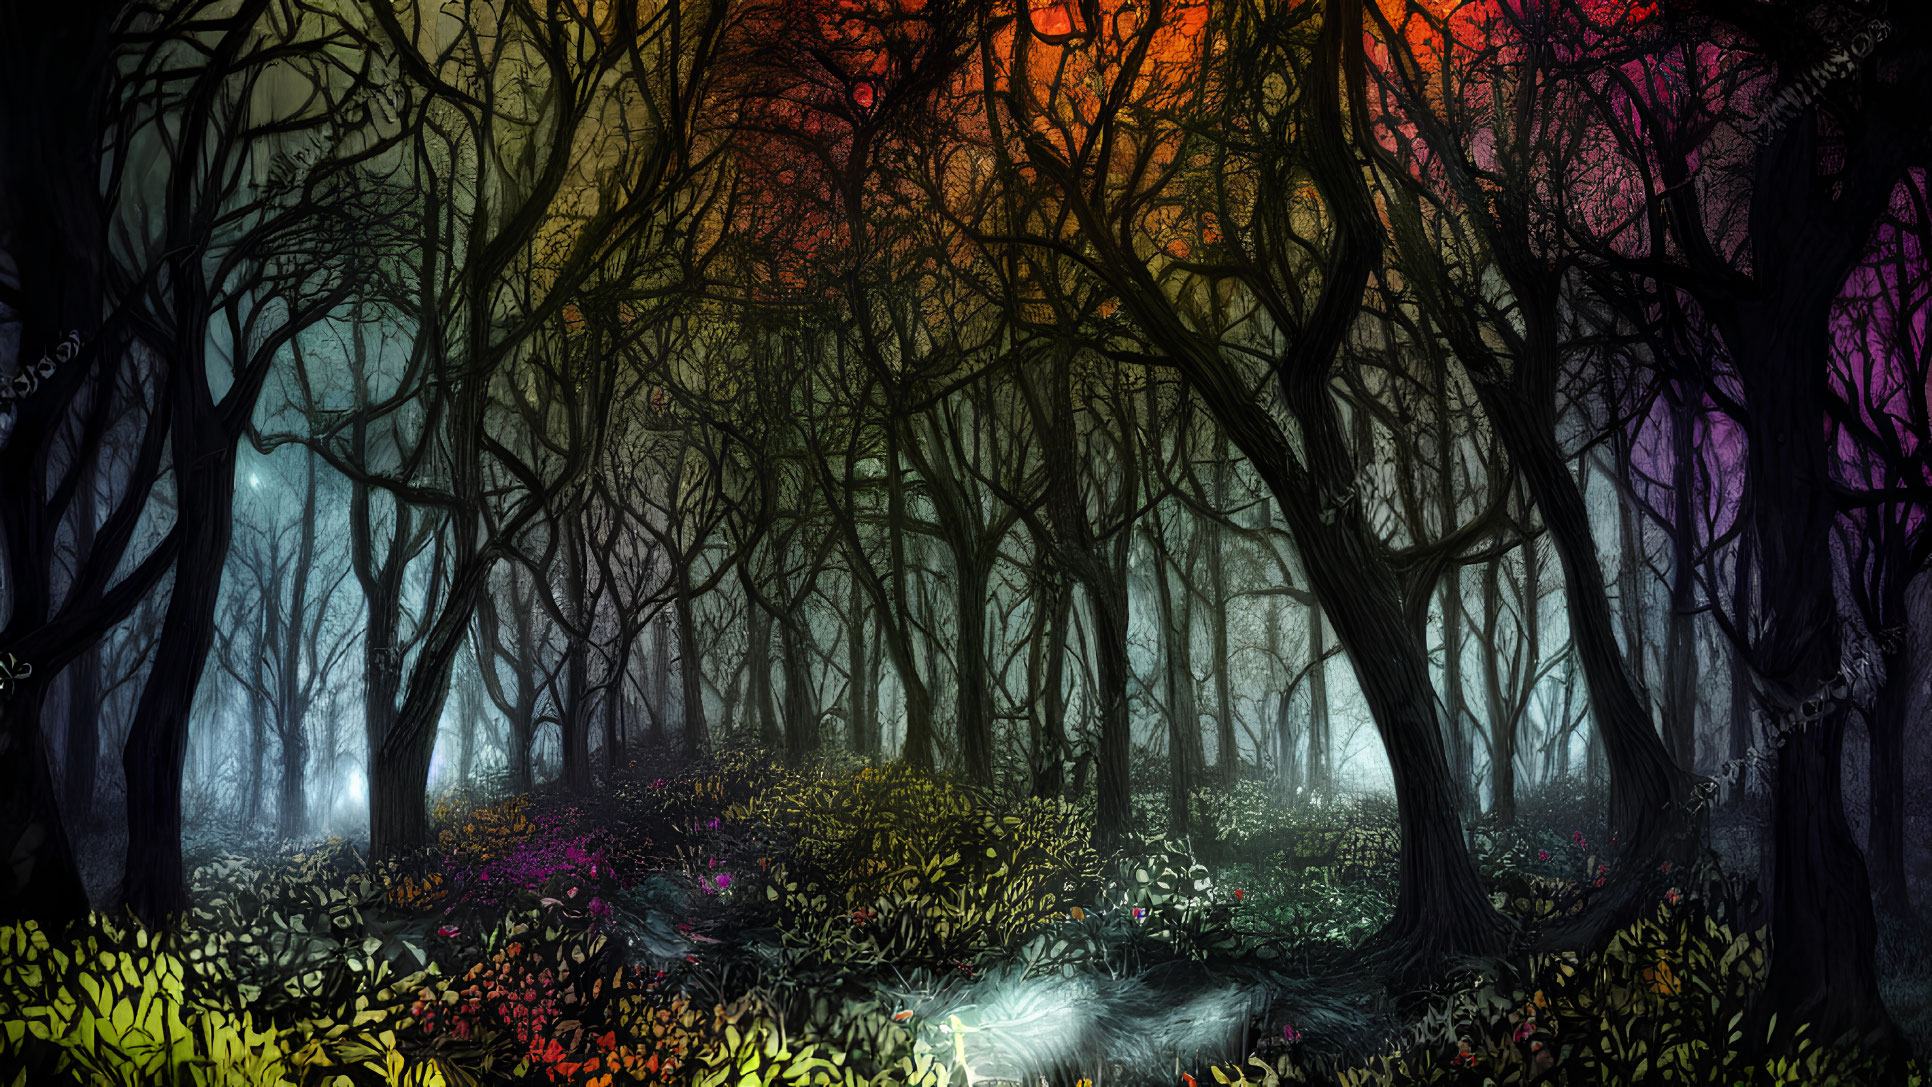 Colorful Lighting in Mystical Forest with Intertwining Tree Branches